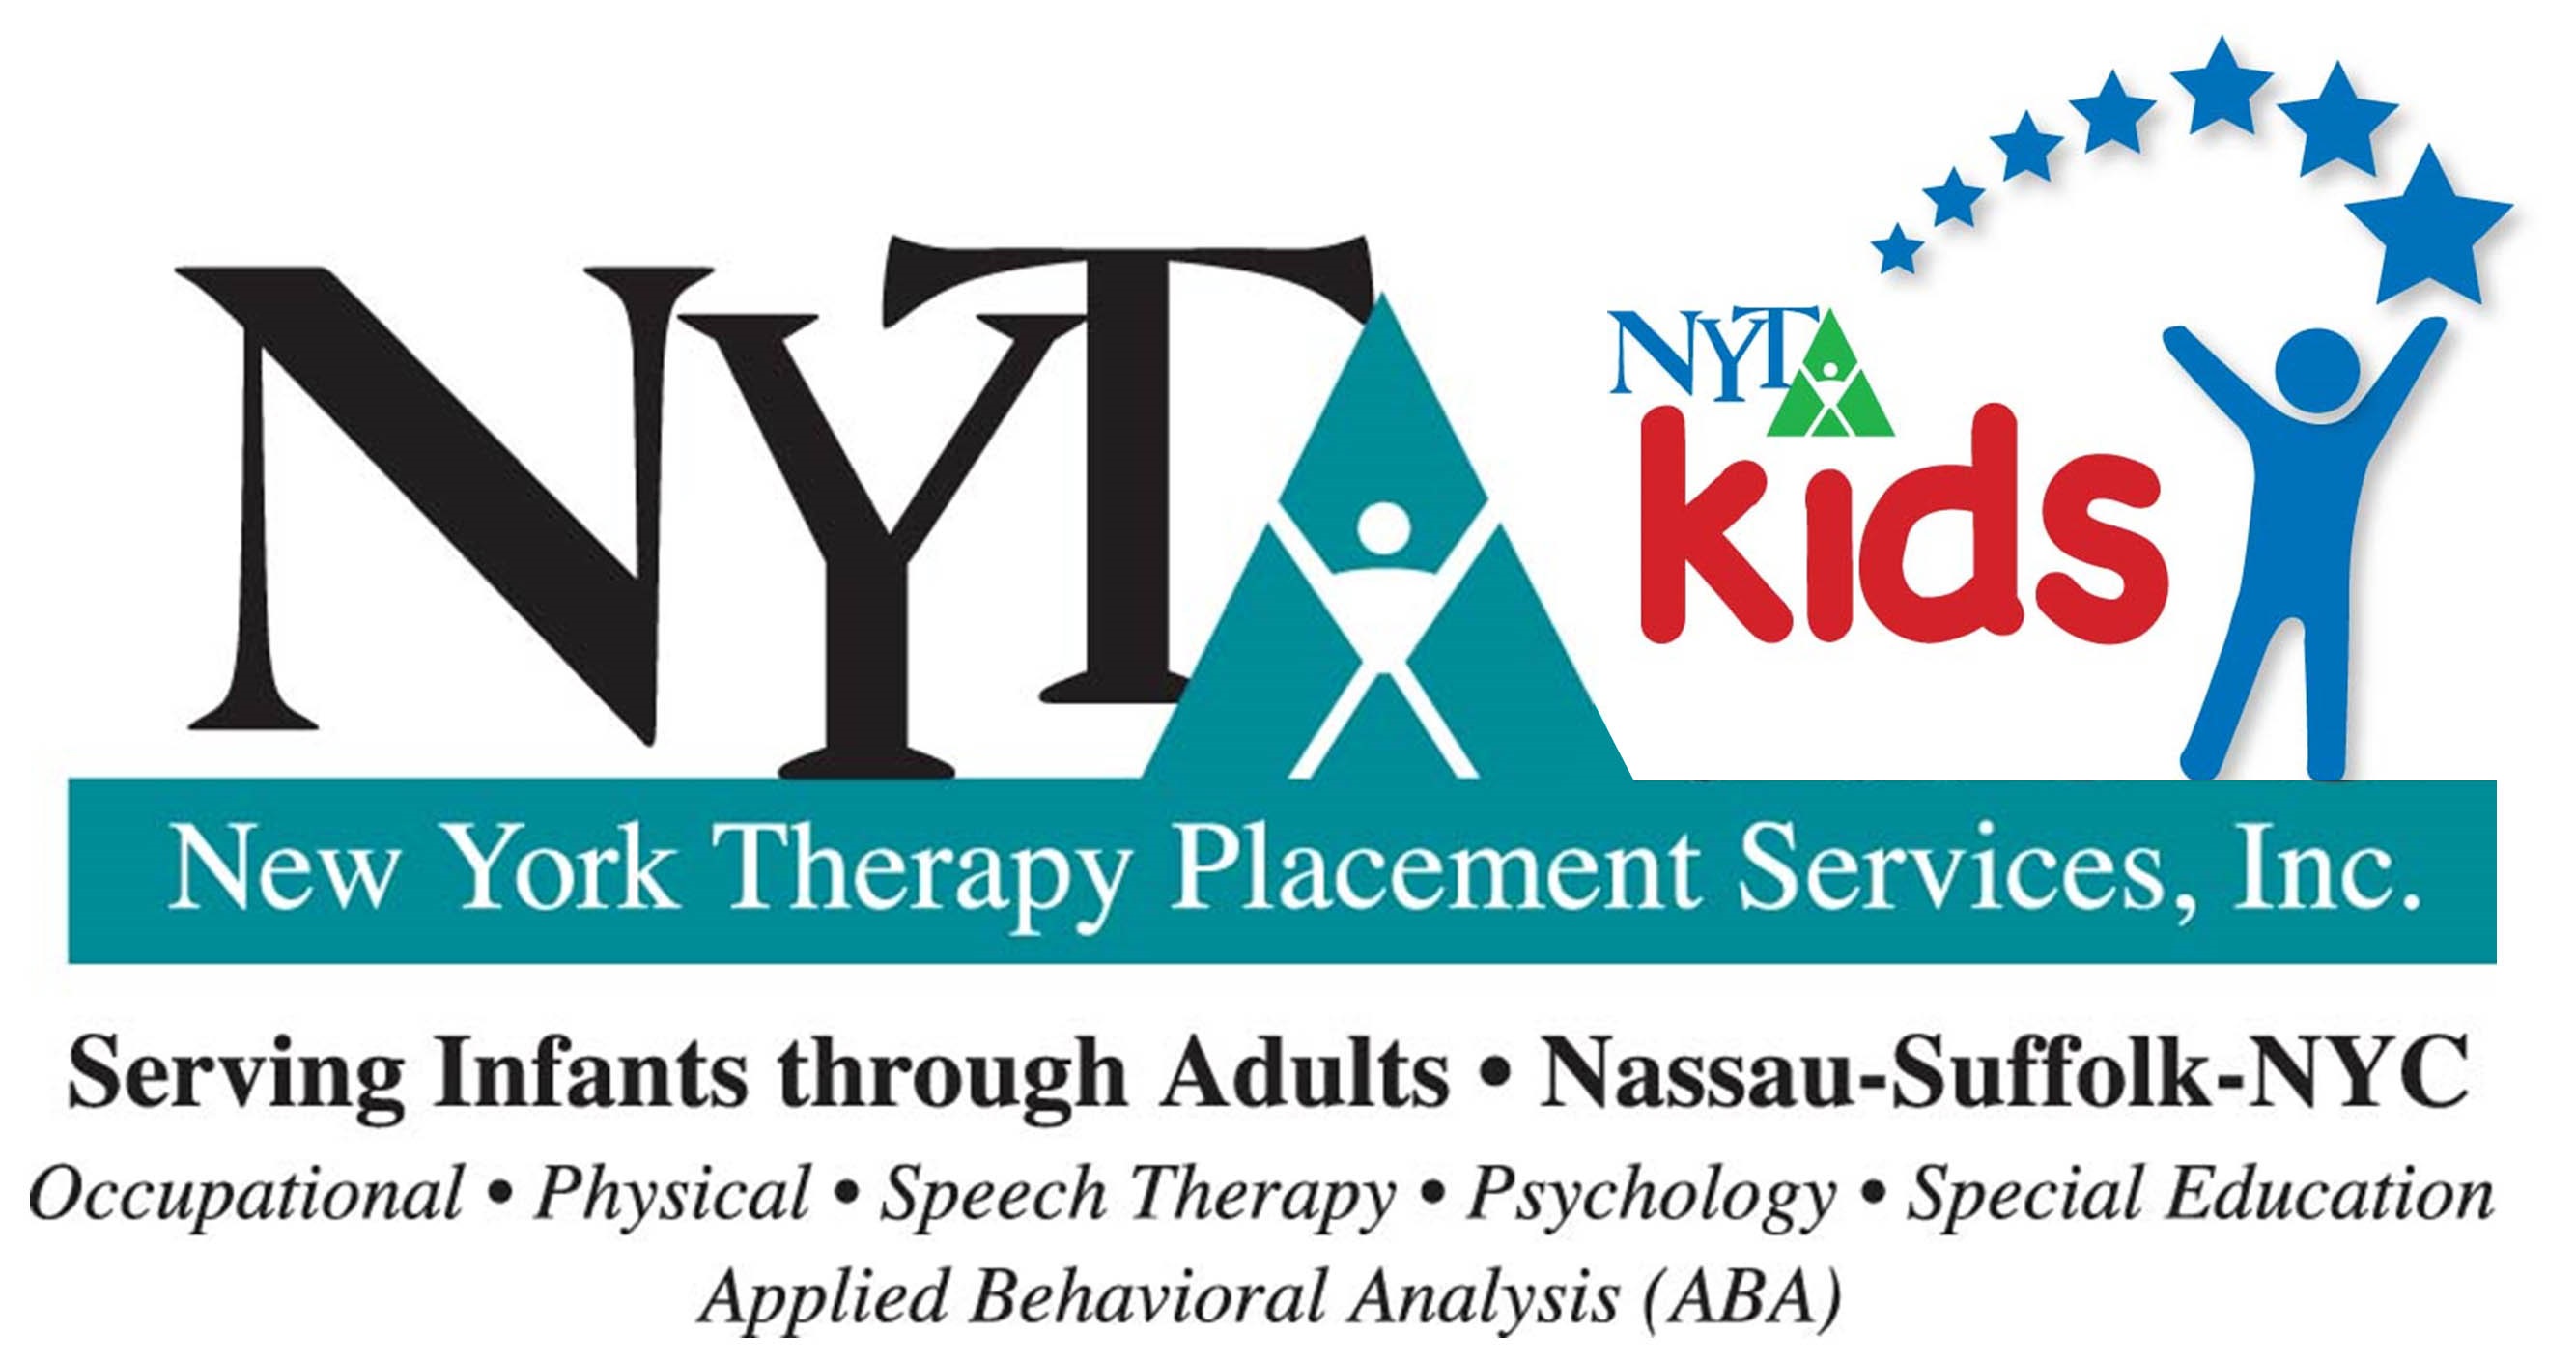 7 New York Therapy Placement Services 